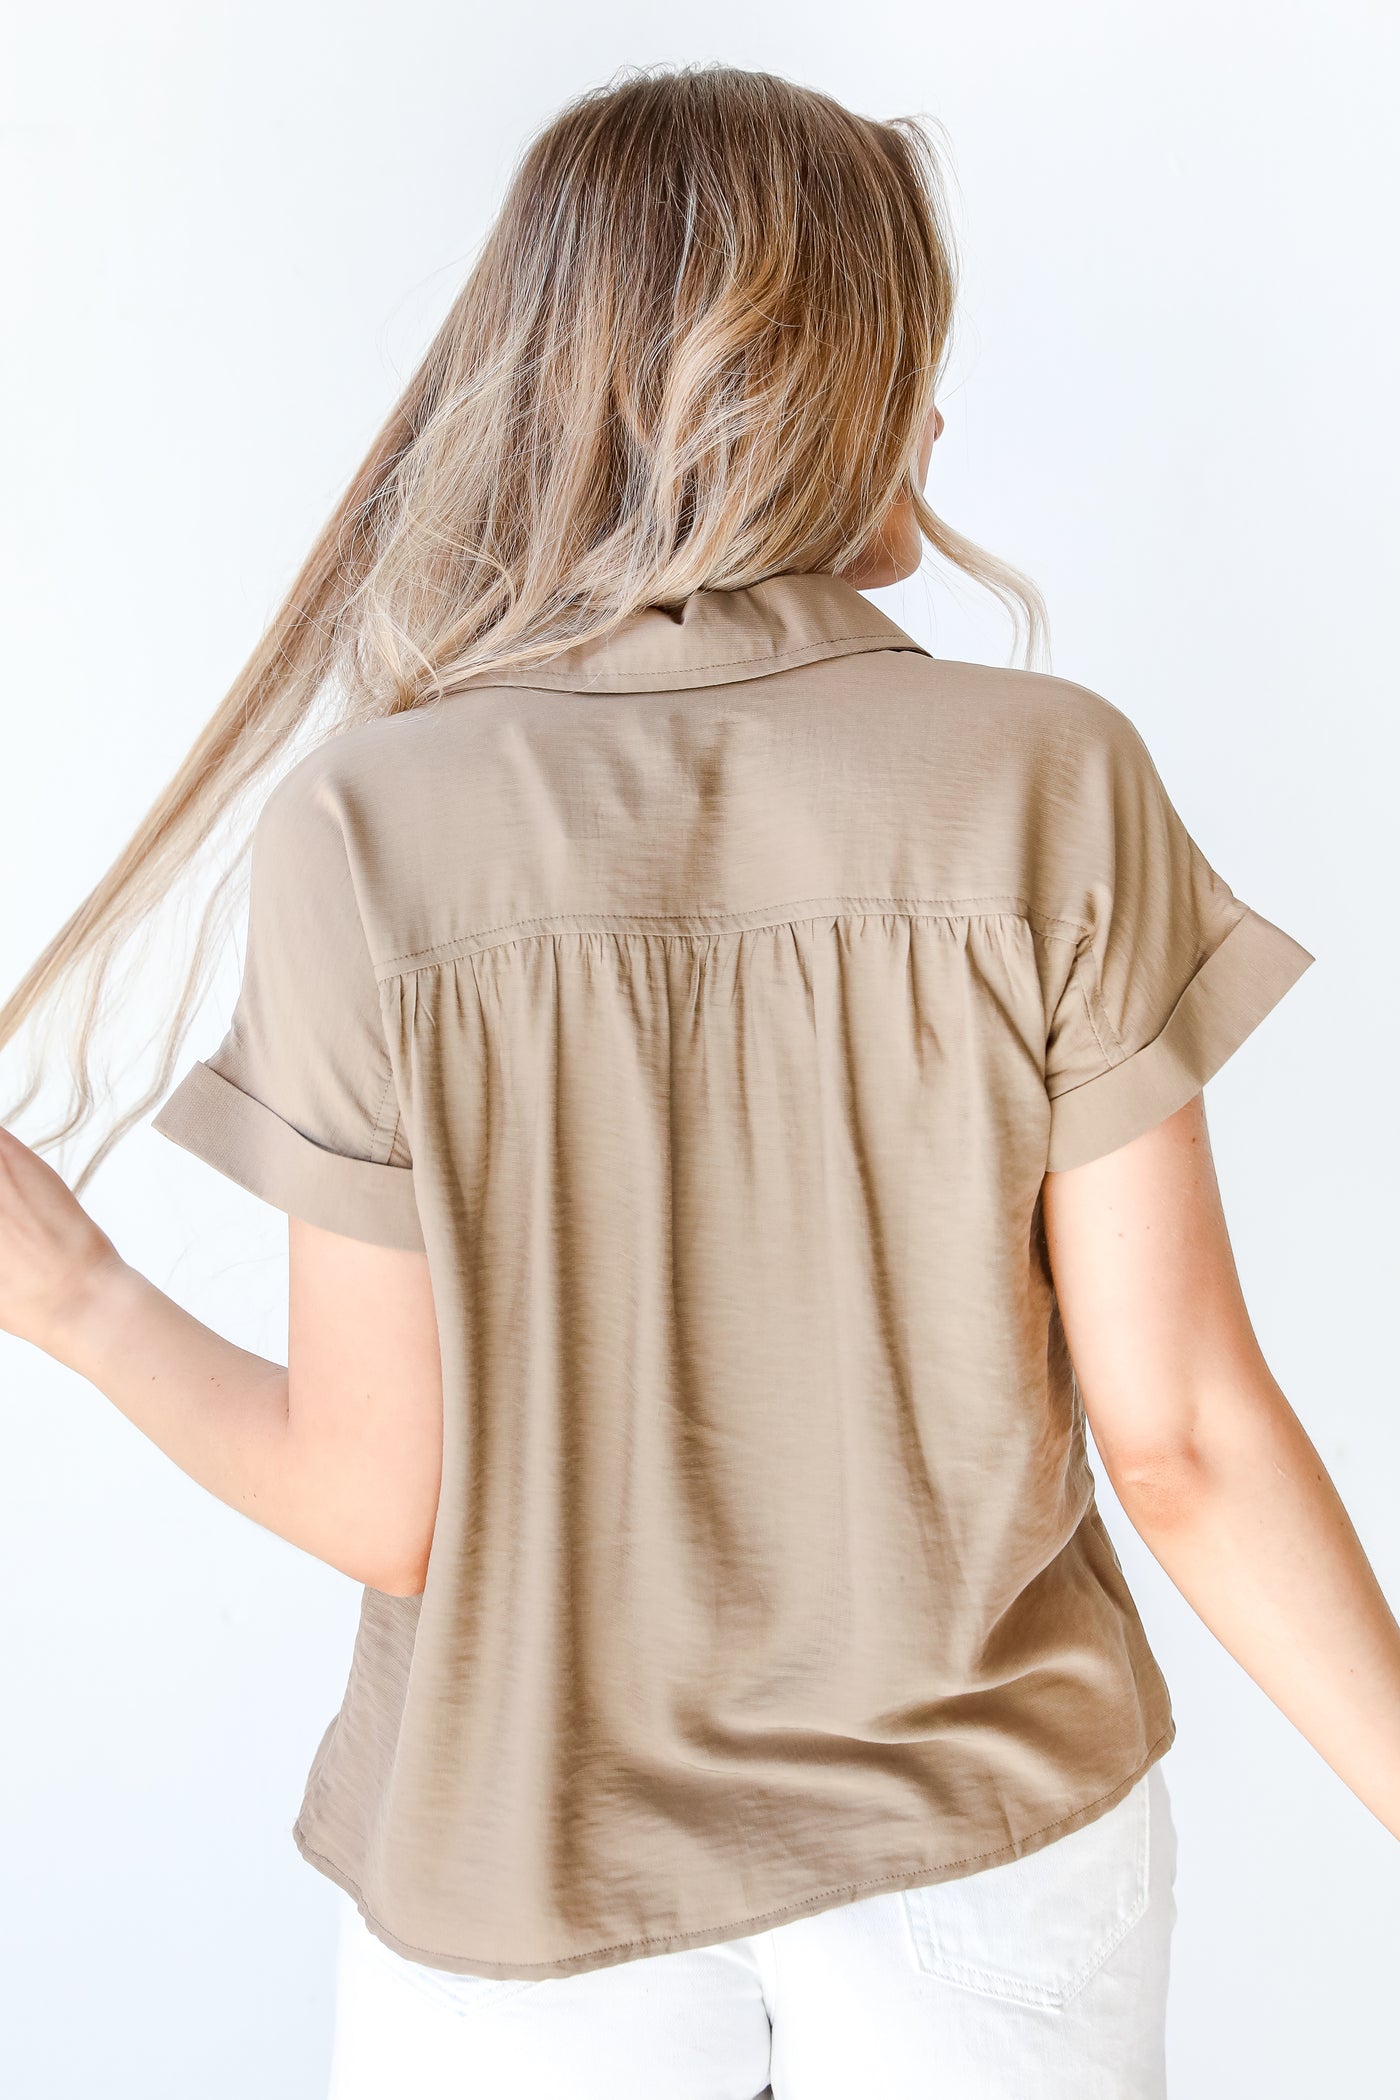 Blouse back view